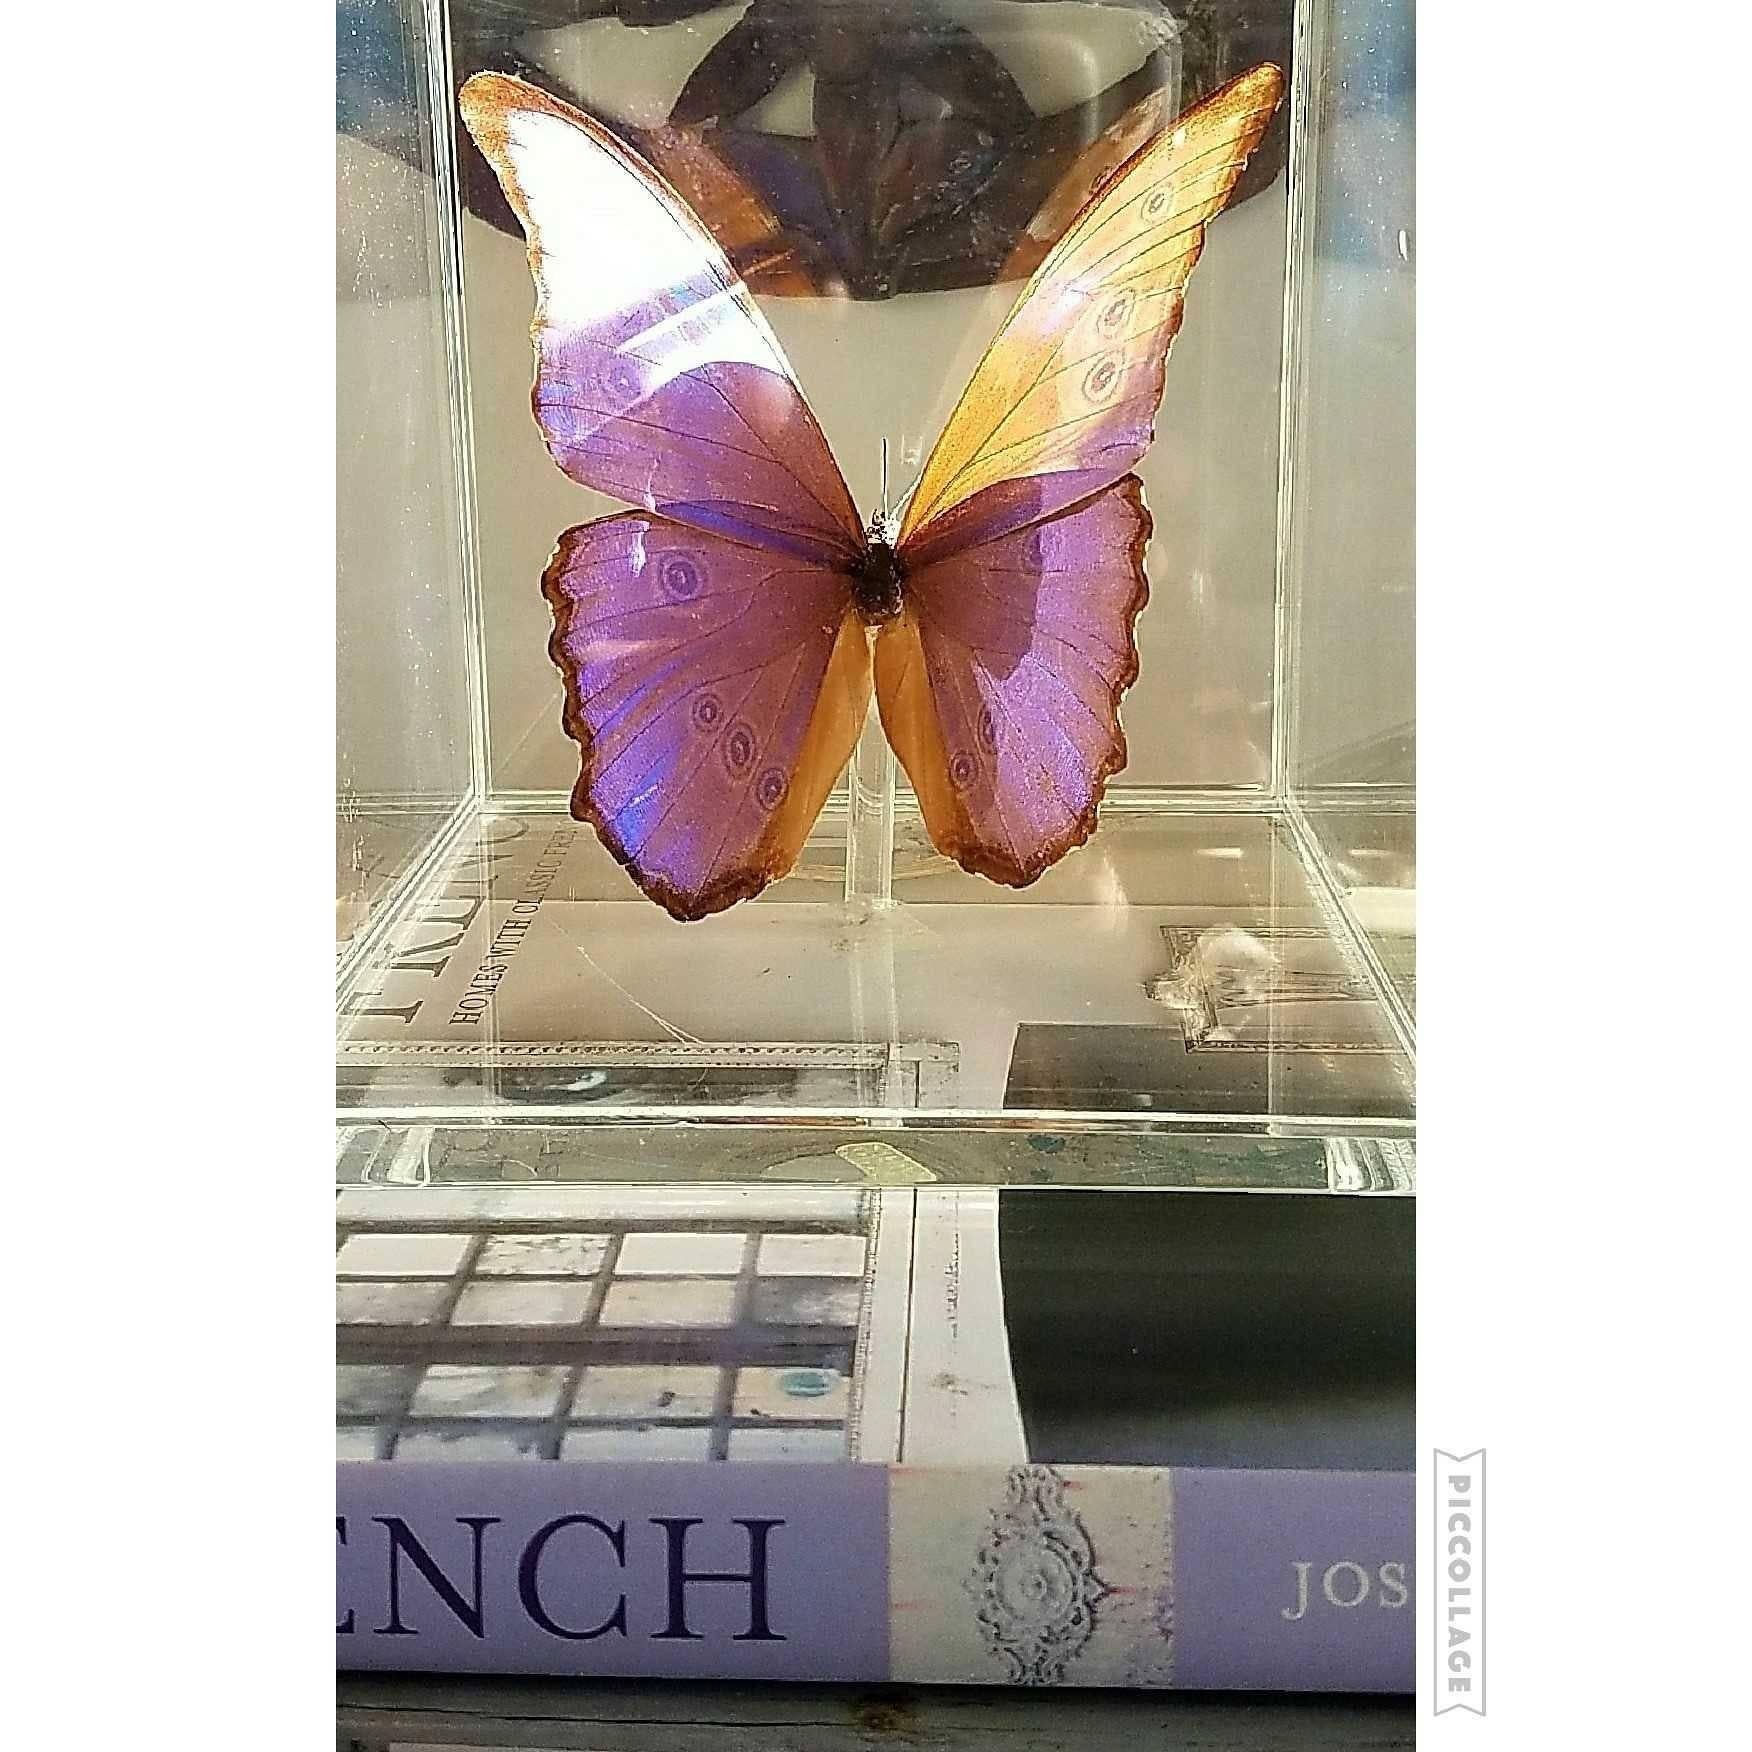 The color of this perfect butterfly specimen is breathtaking. The condition is perfect and the display case is also in great condition with its generous size.